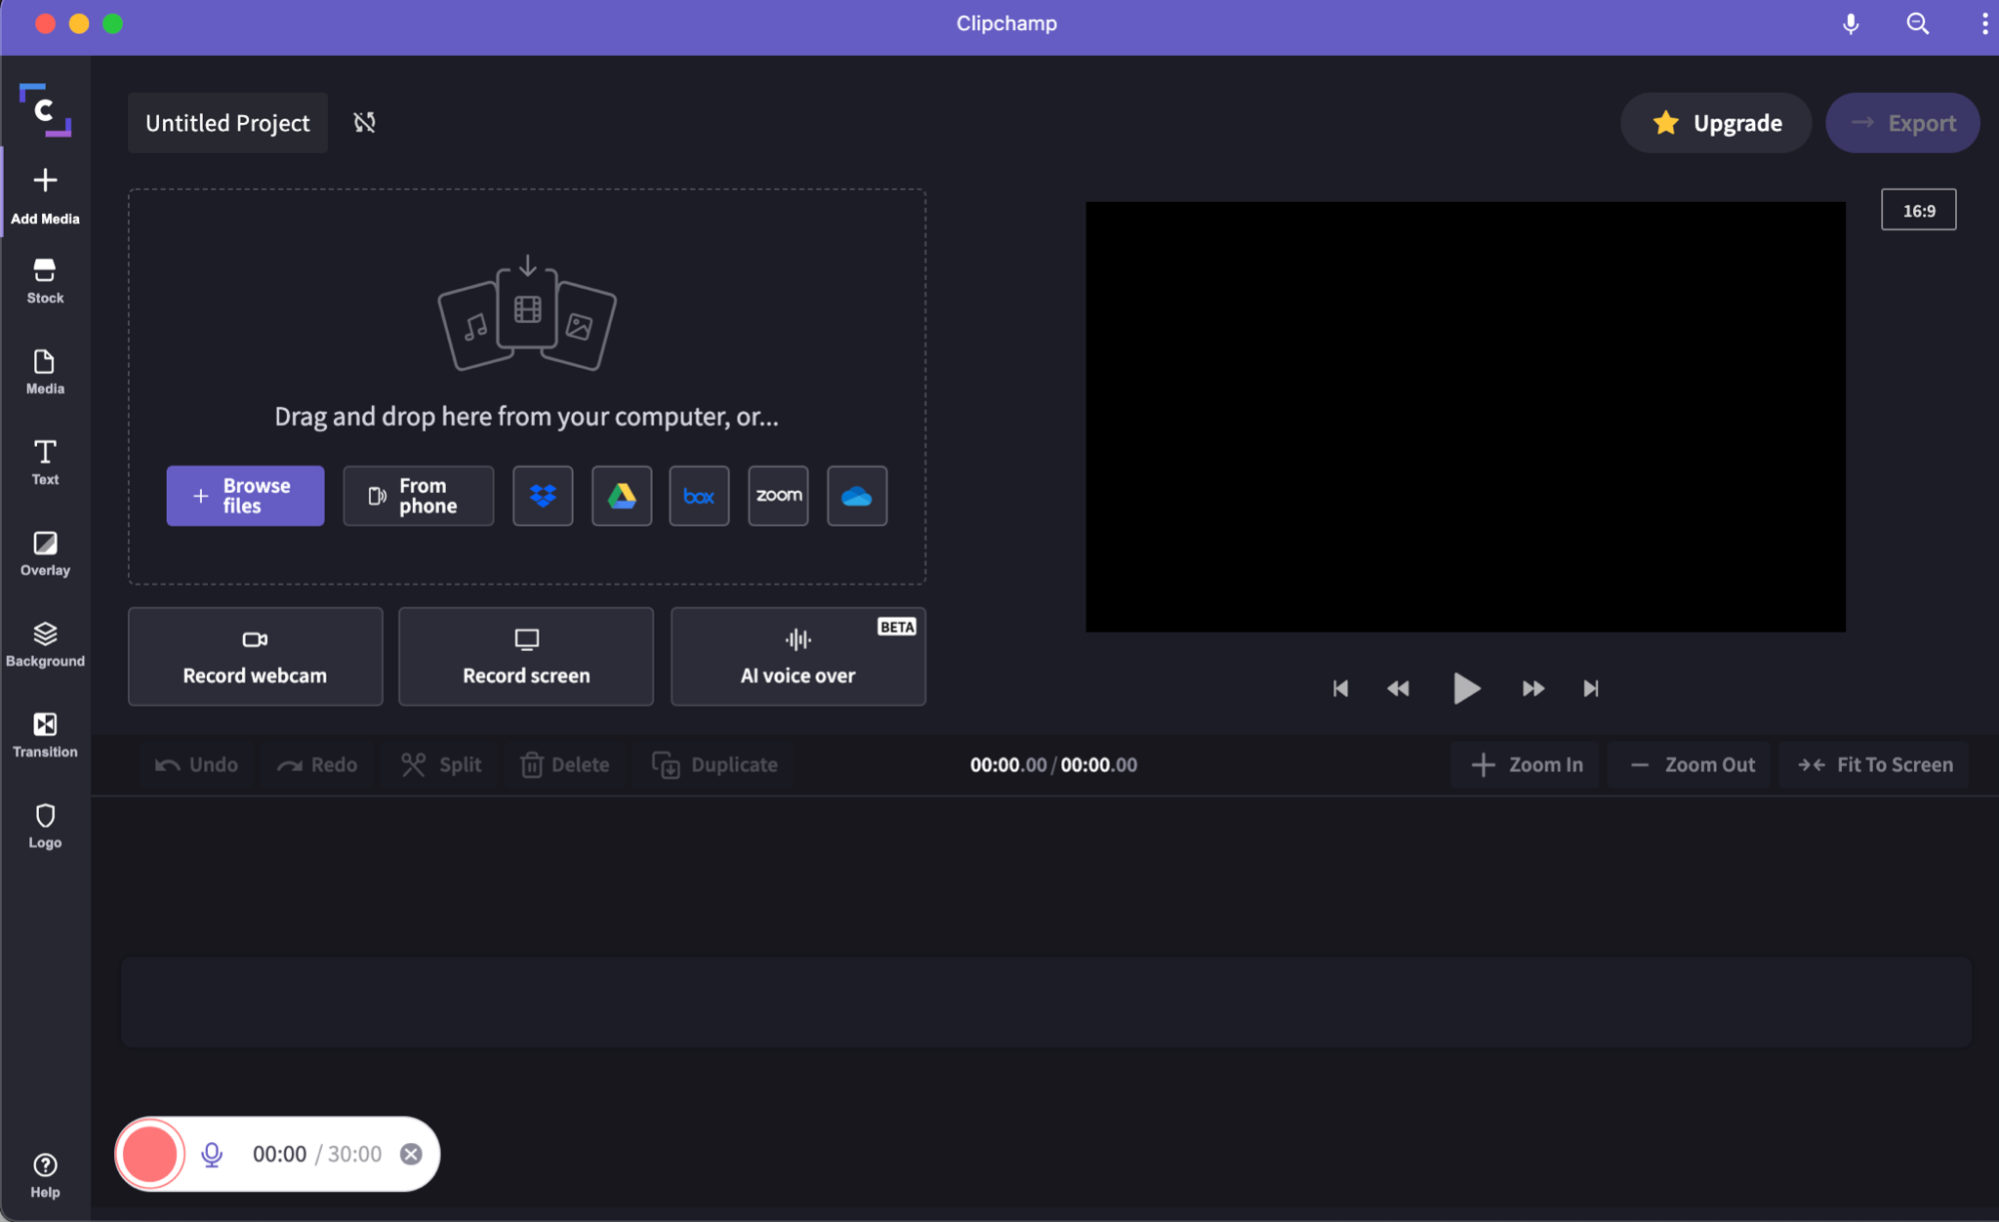 Start screen recording-How to download Twitch clips to make YouTube videos-Clipchamp blog